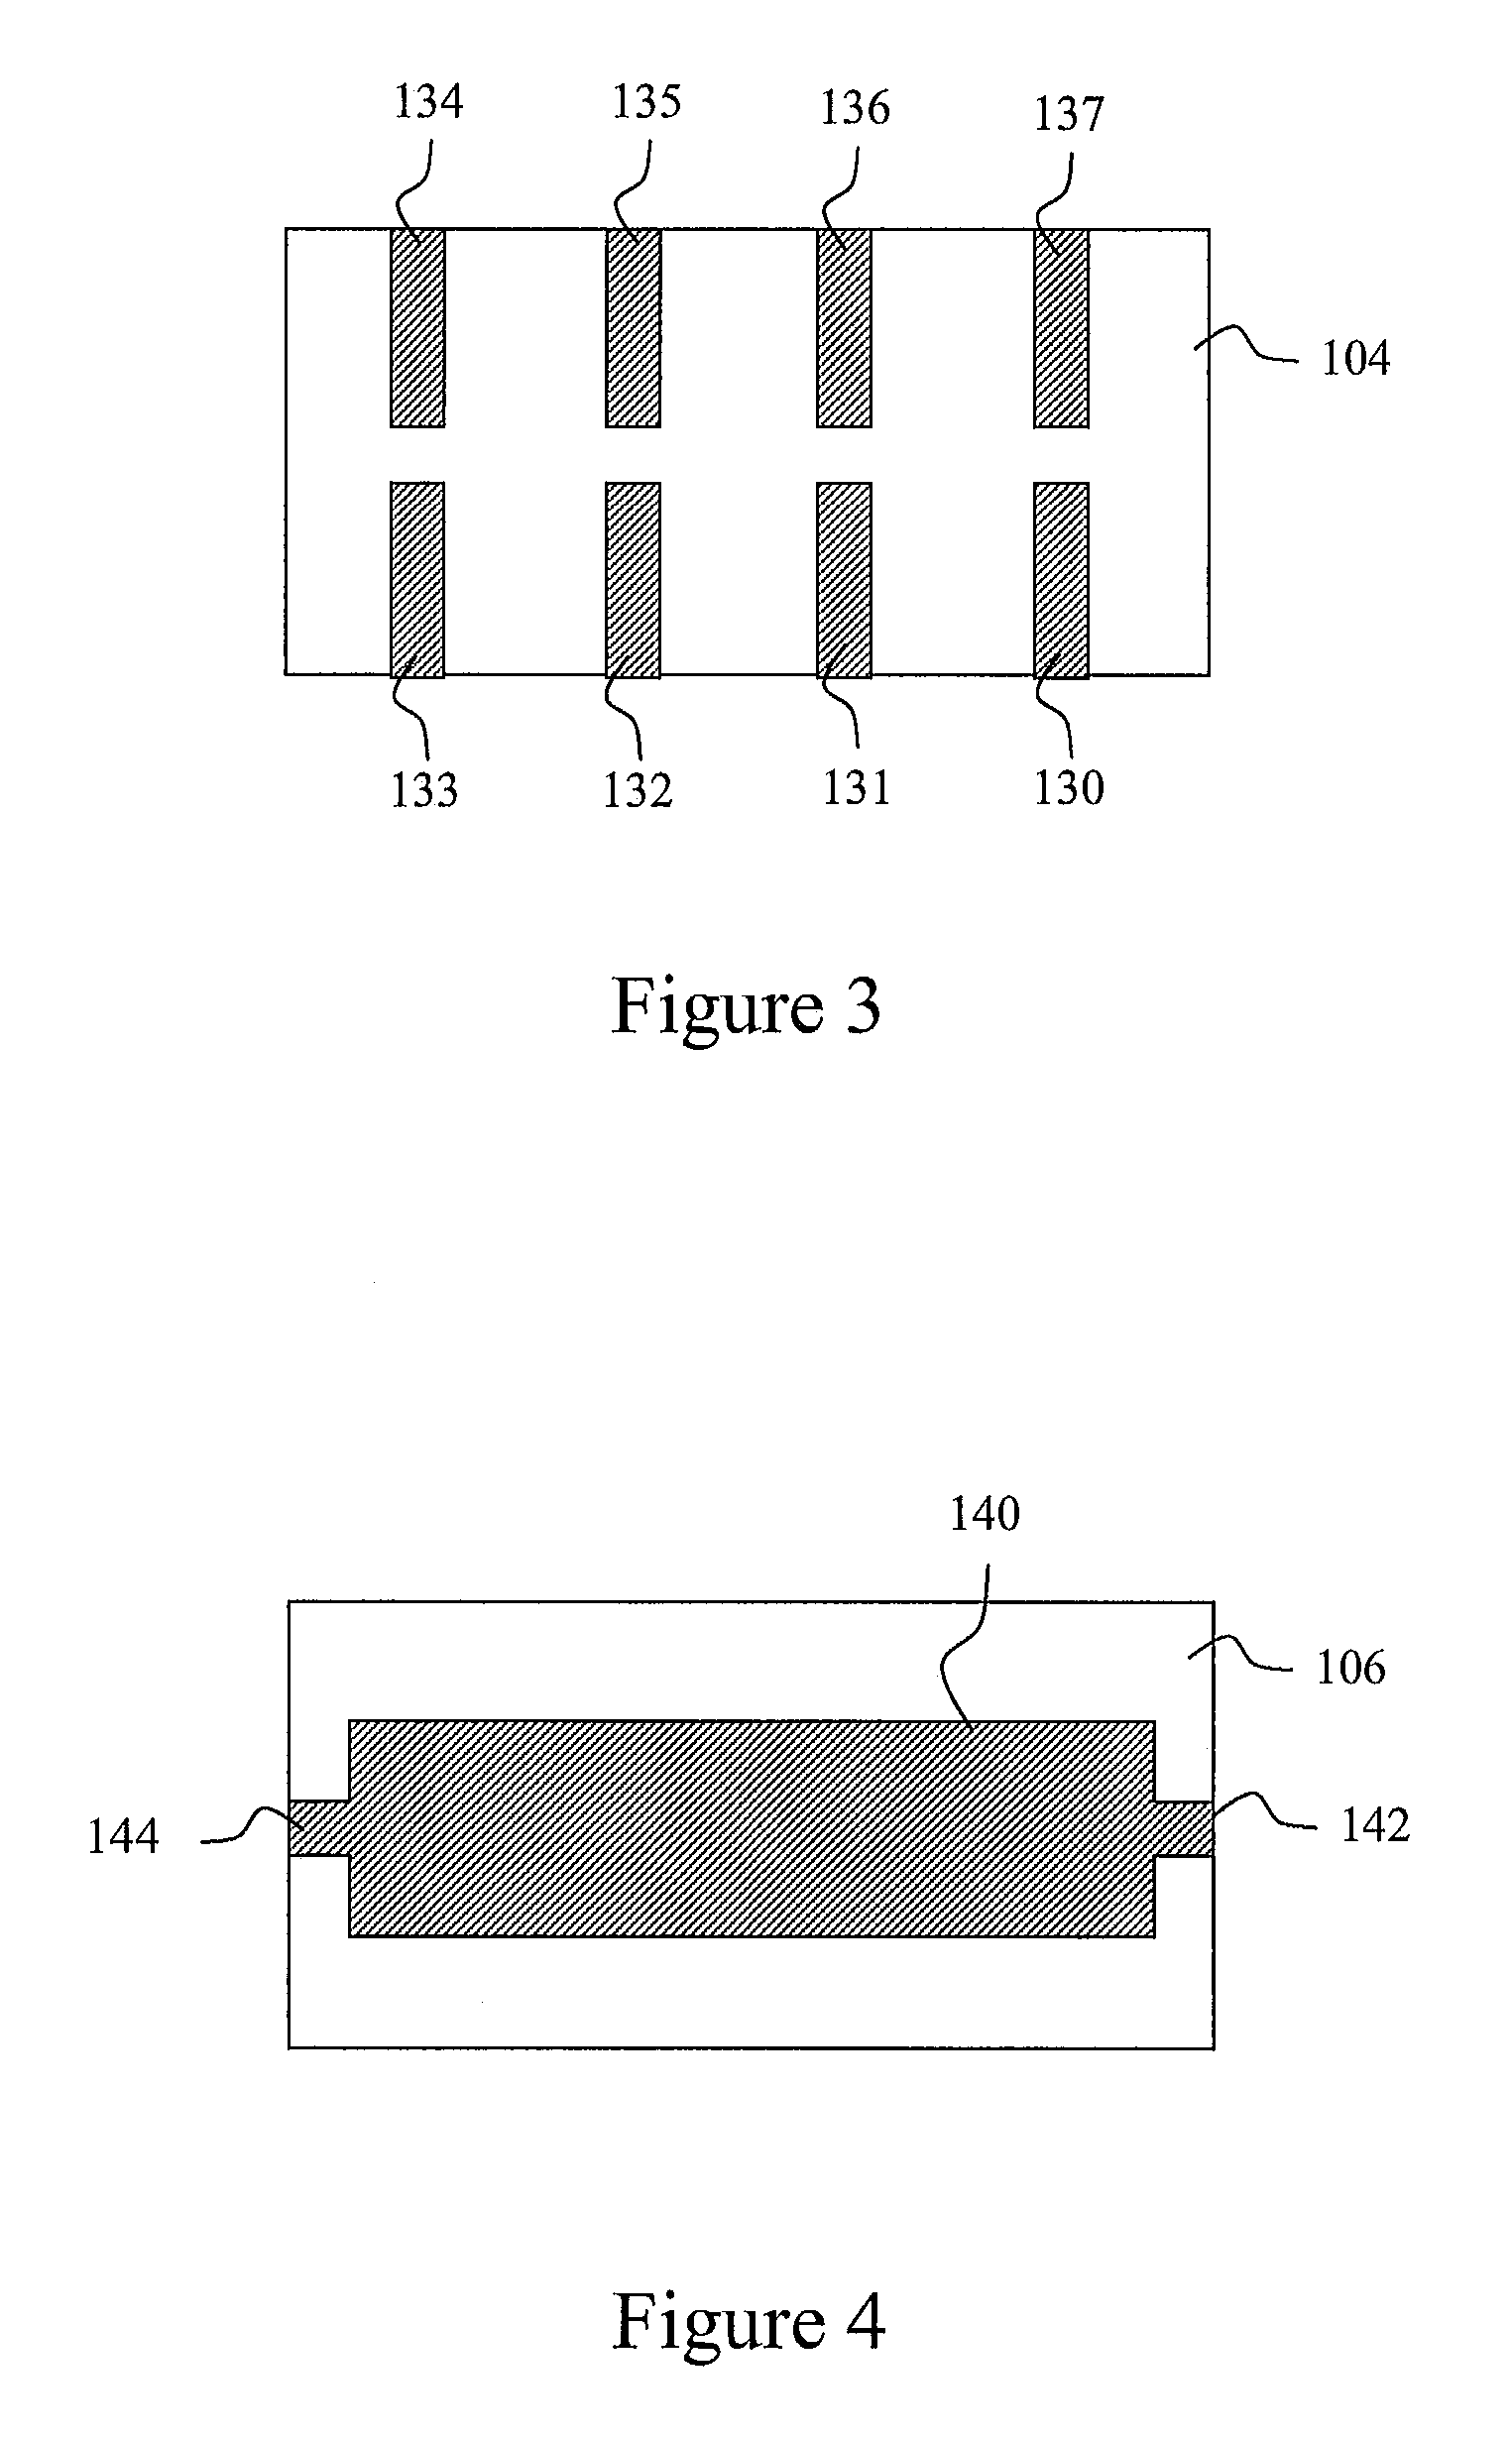 Element array and footprint layout for element array